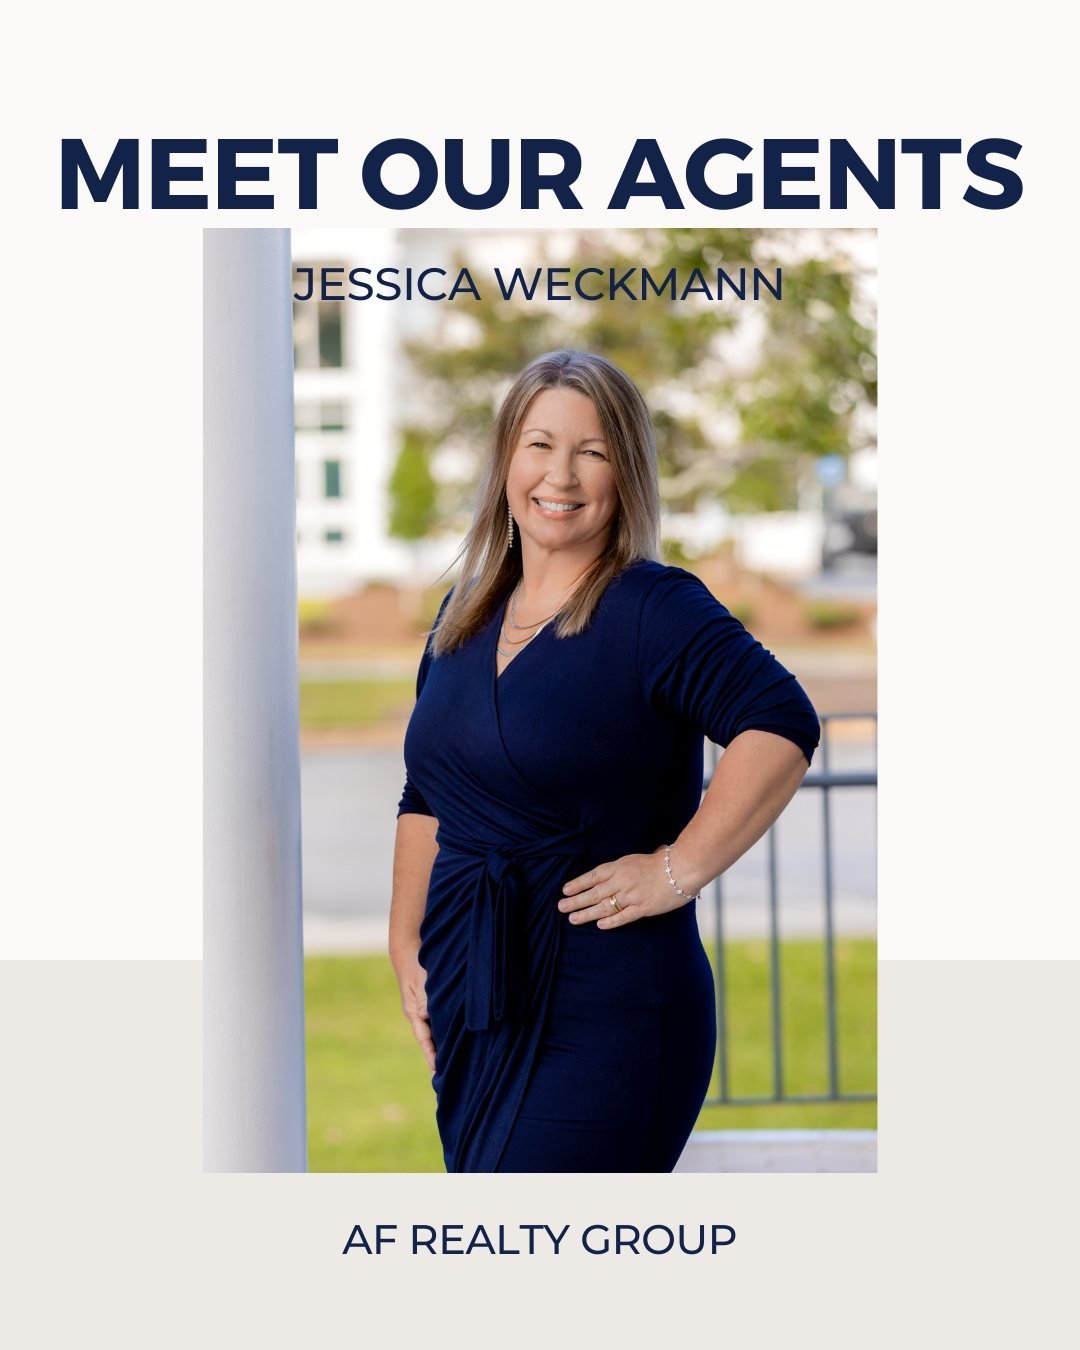 Introducing our amazing agents at AF Realty Group! 🏡 From seasoned experts to rising stars, each member of our AF family brings something unique and different to the table! These individuals go above and beyond, whether working with clients in their